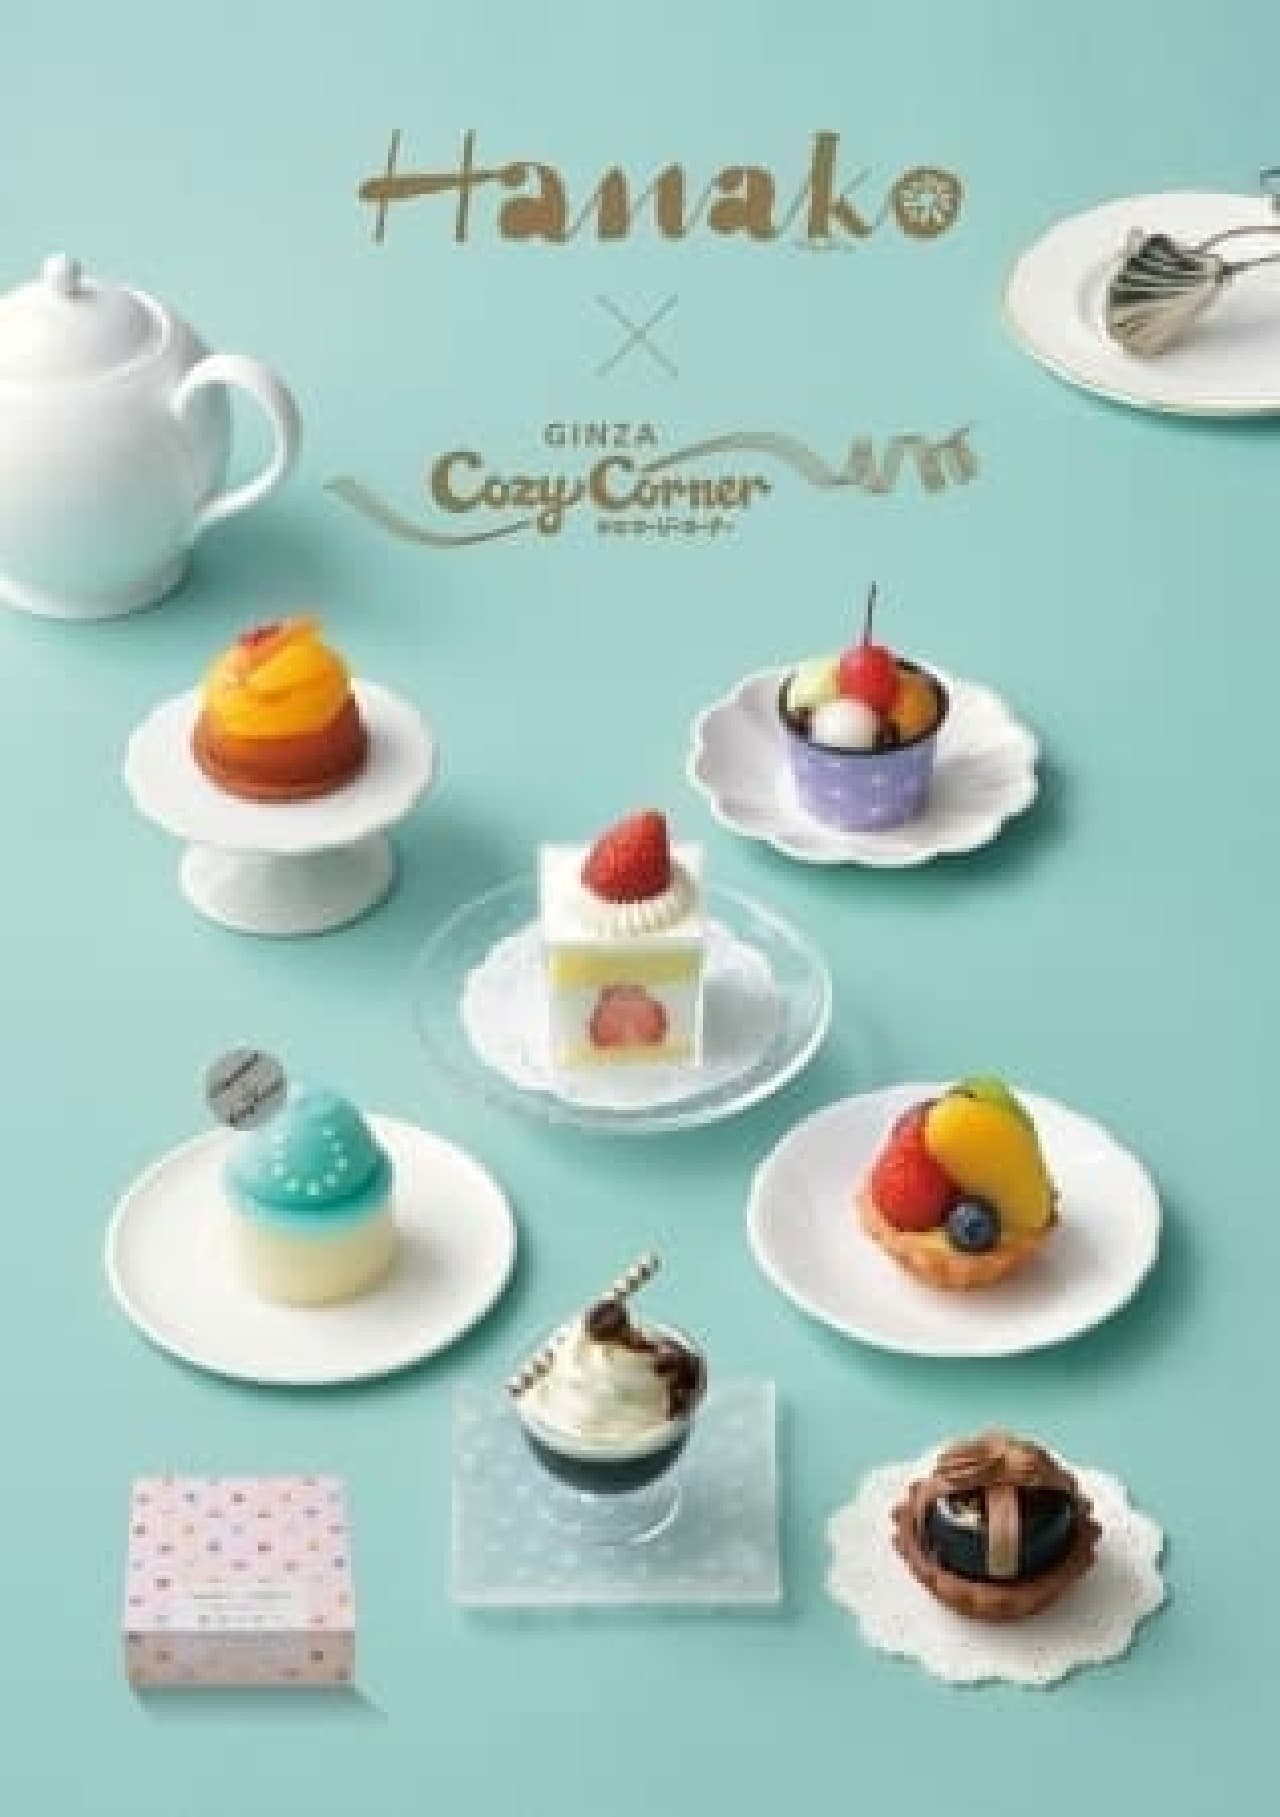 A collaboration between Ginza Cozy Corner and the magazine "Hanako" "7 things that come true in Ginza."